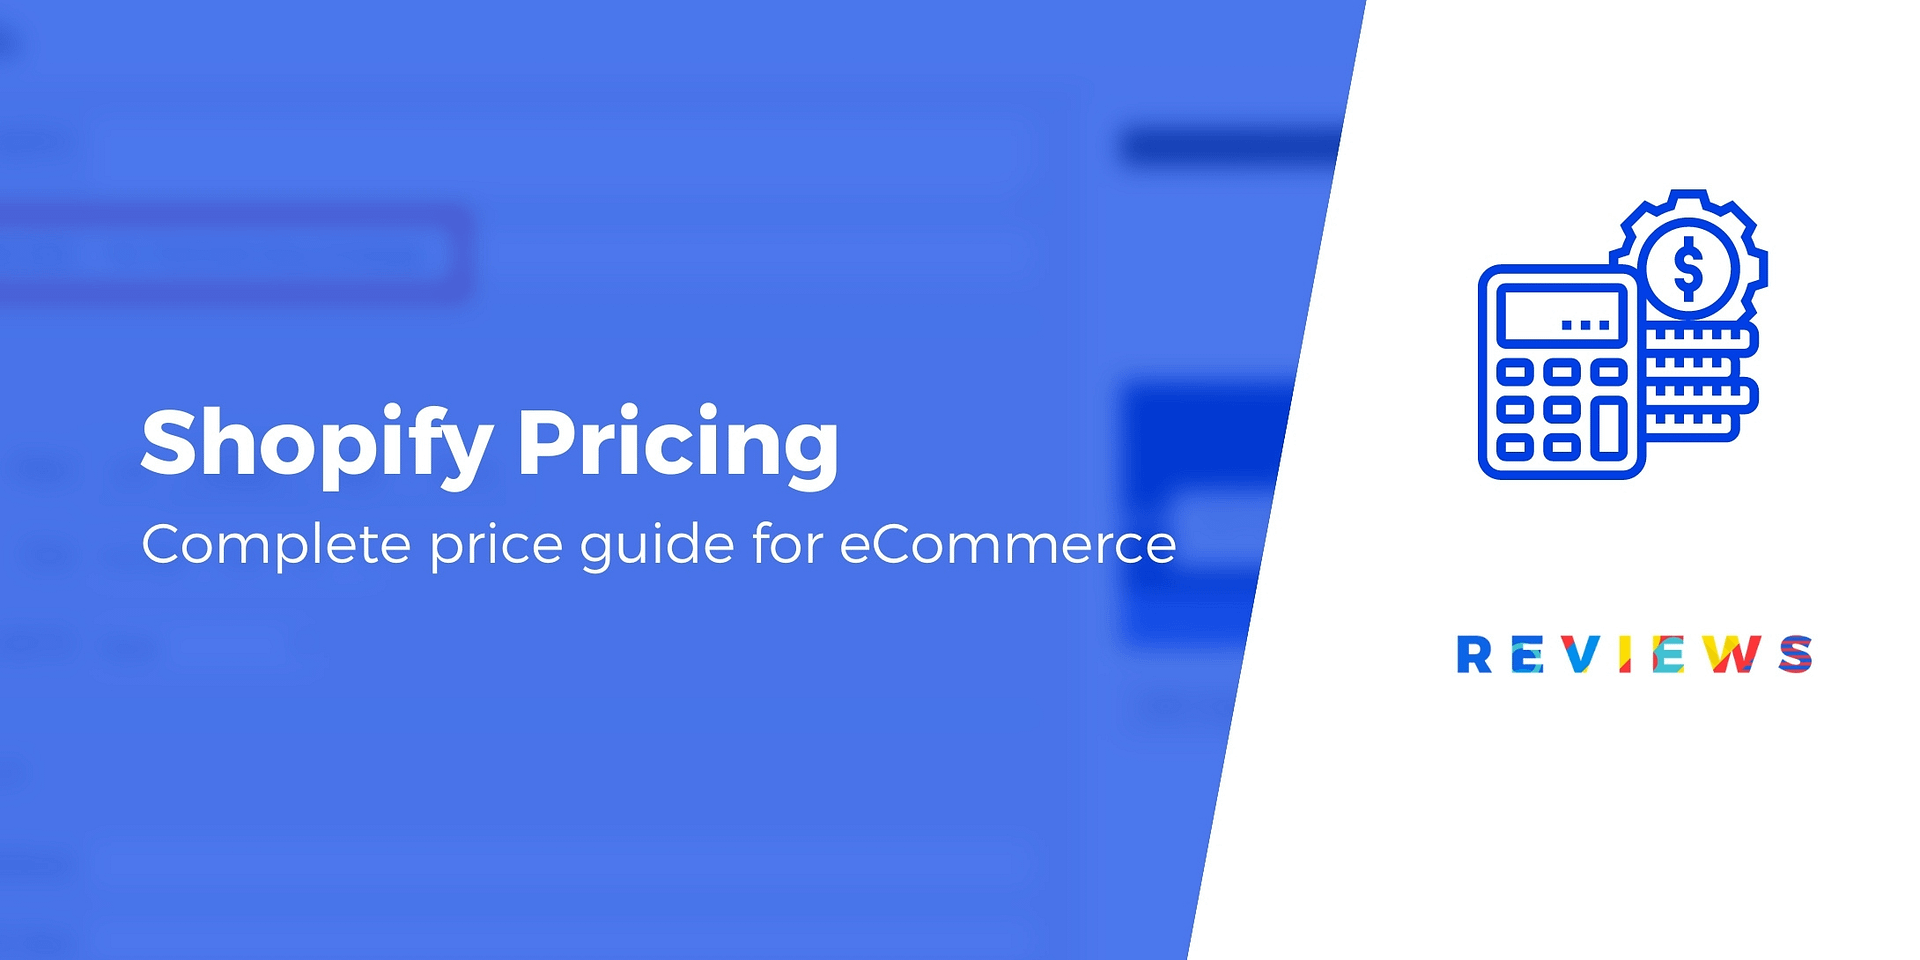 Building a best-in-class eCommerce experience on Shopify Plus for